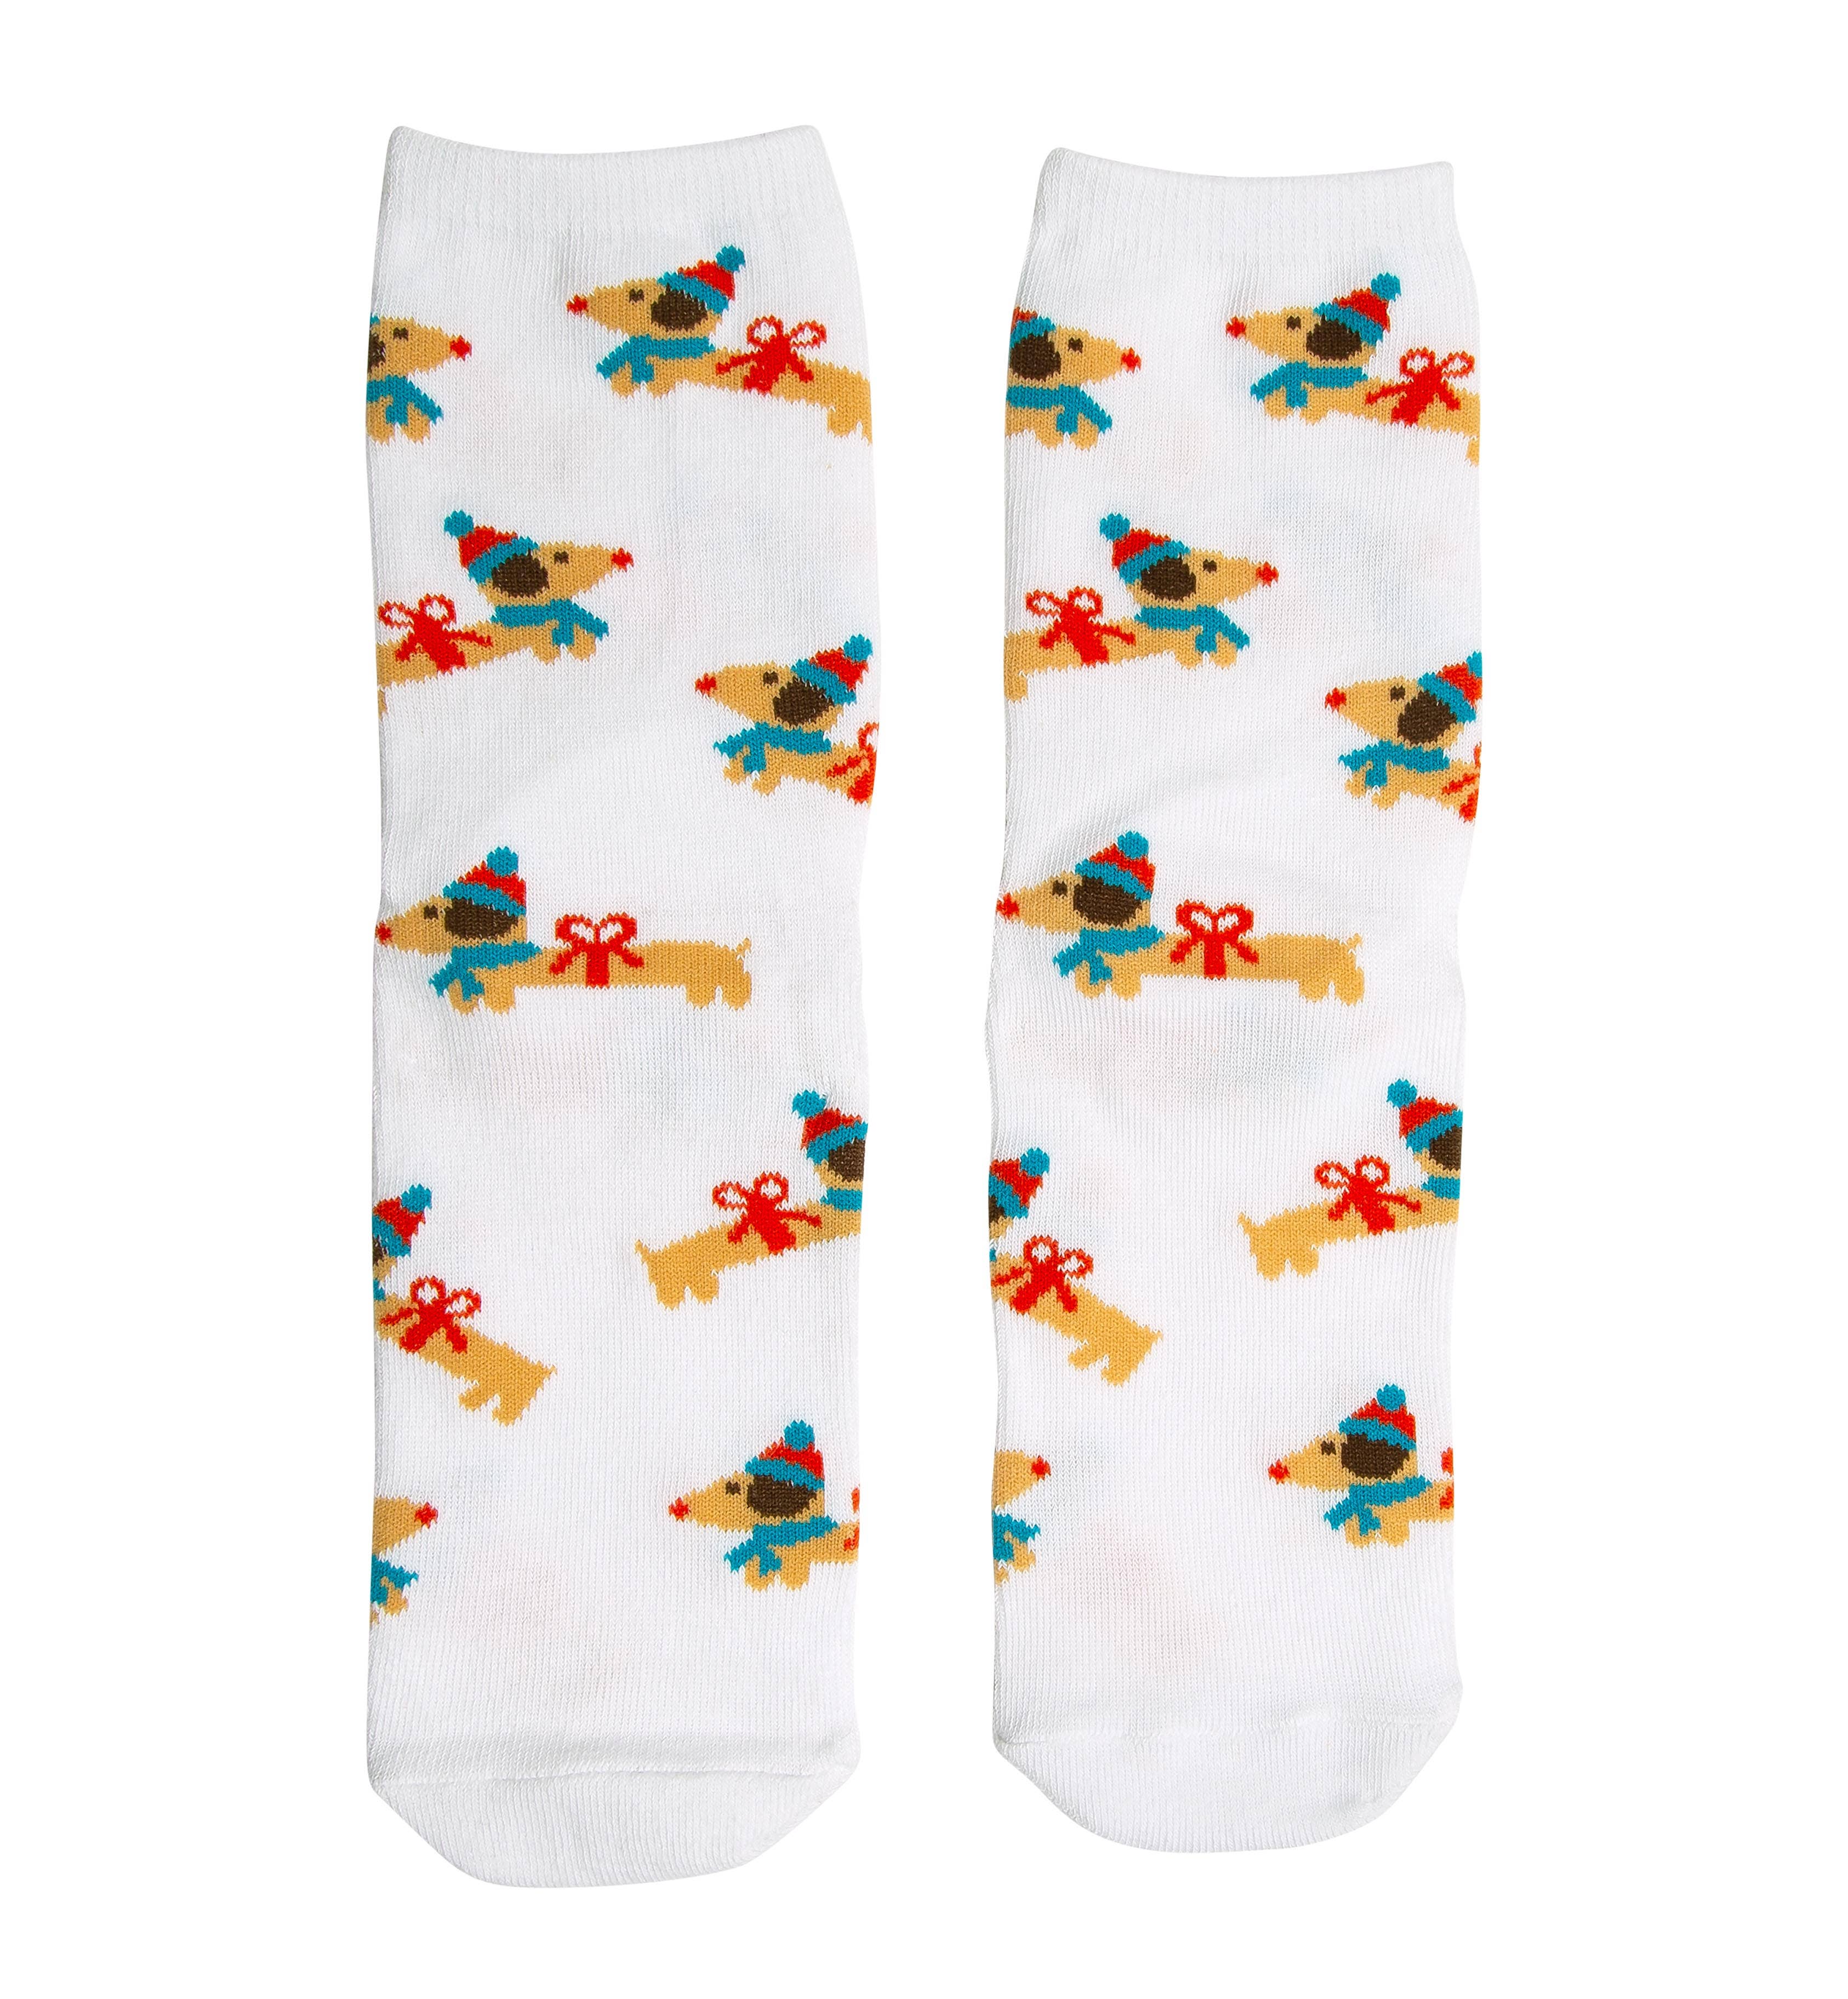 Socks Are the Perfect Holiday Gift